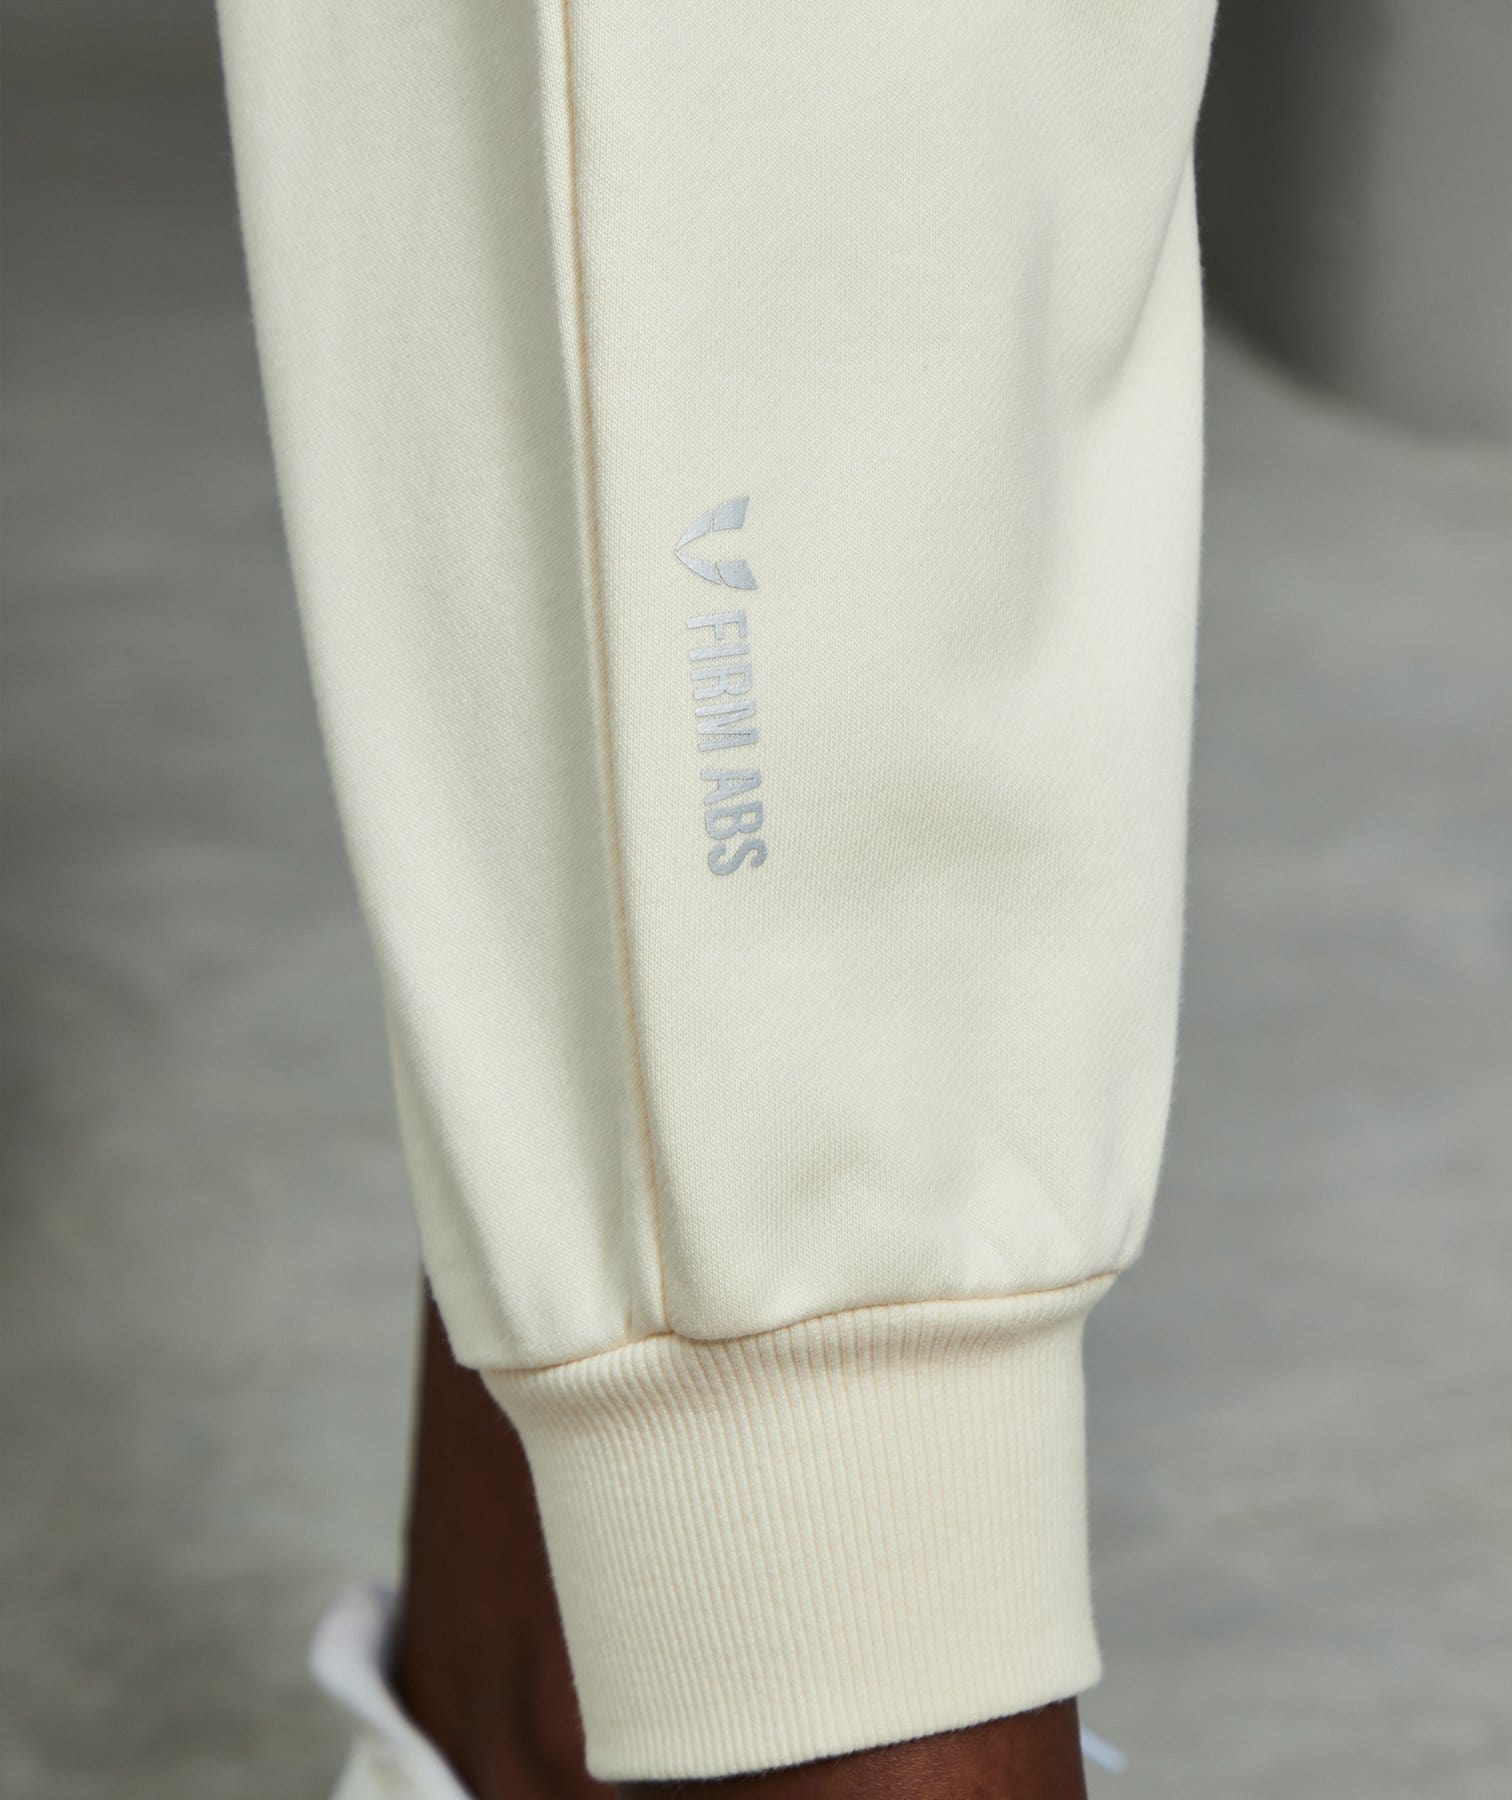 Ribbed Cuff Jogger Pants In Light Apricot